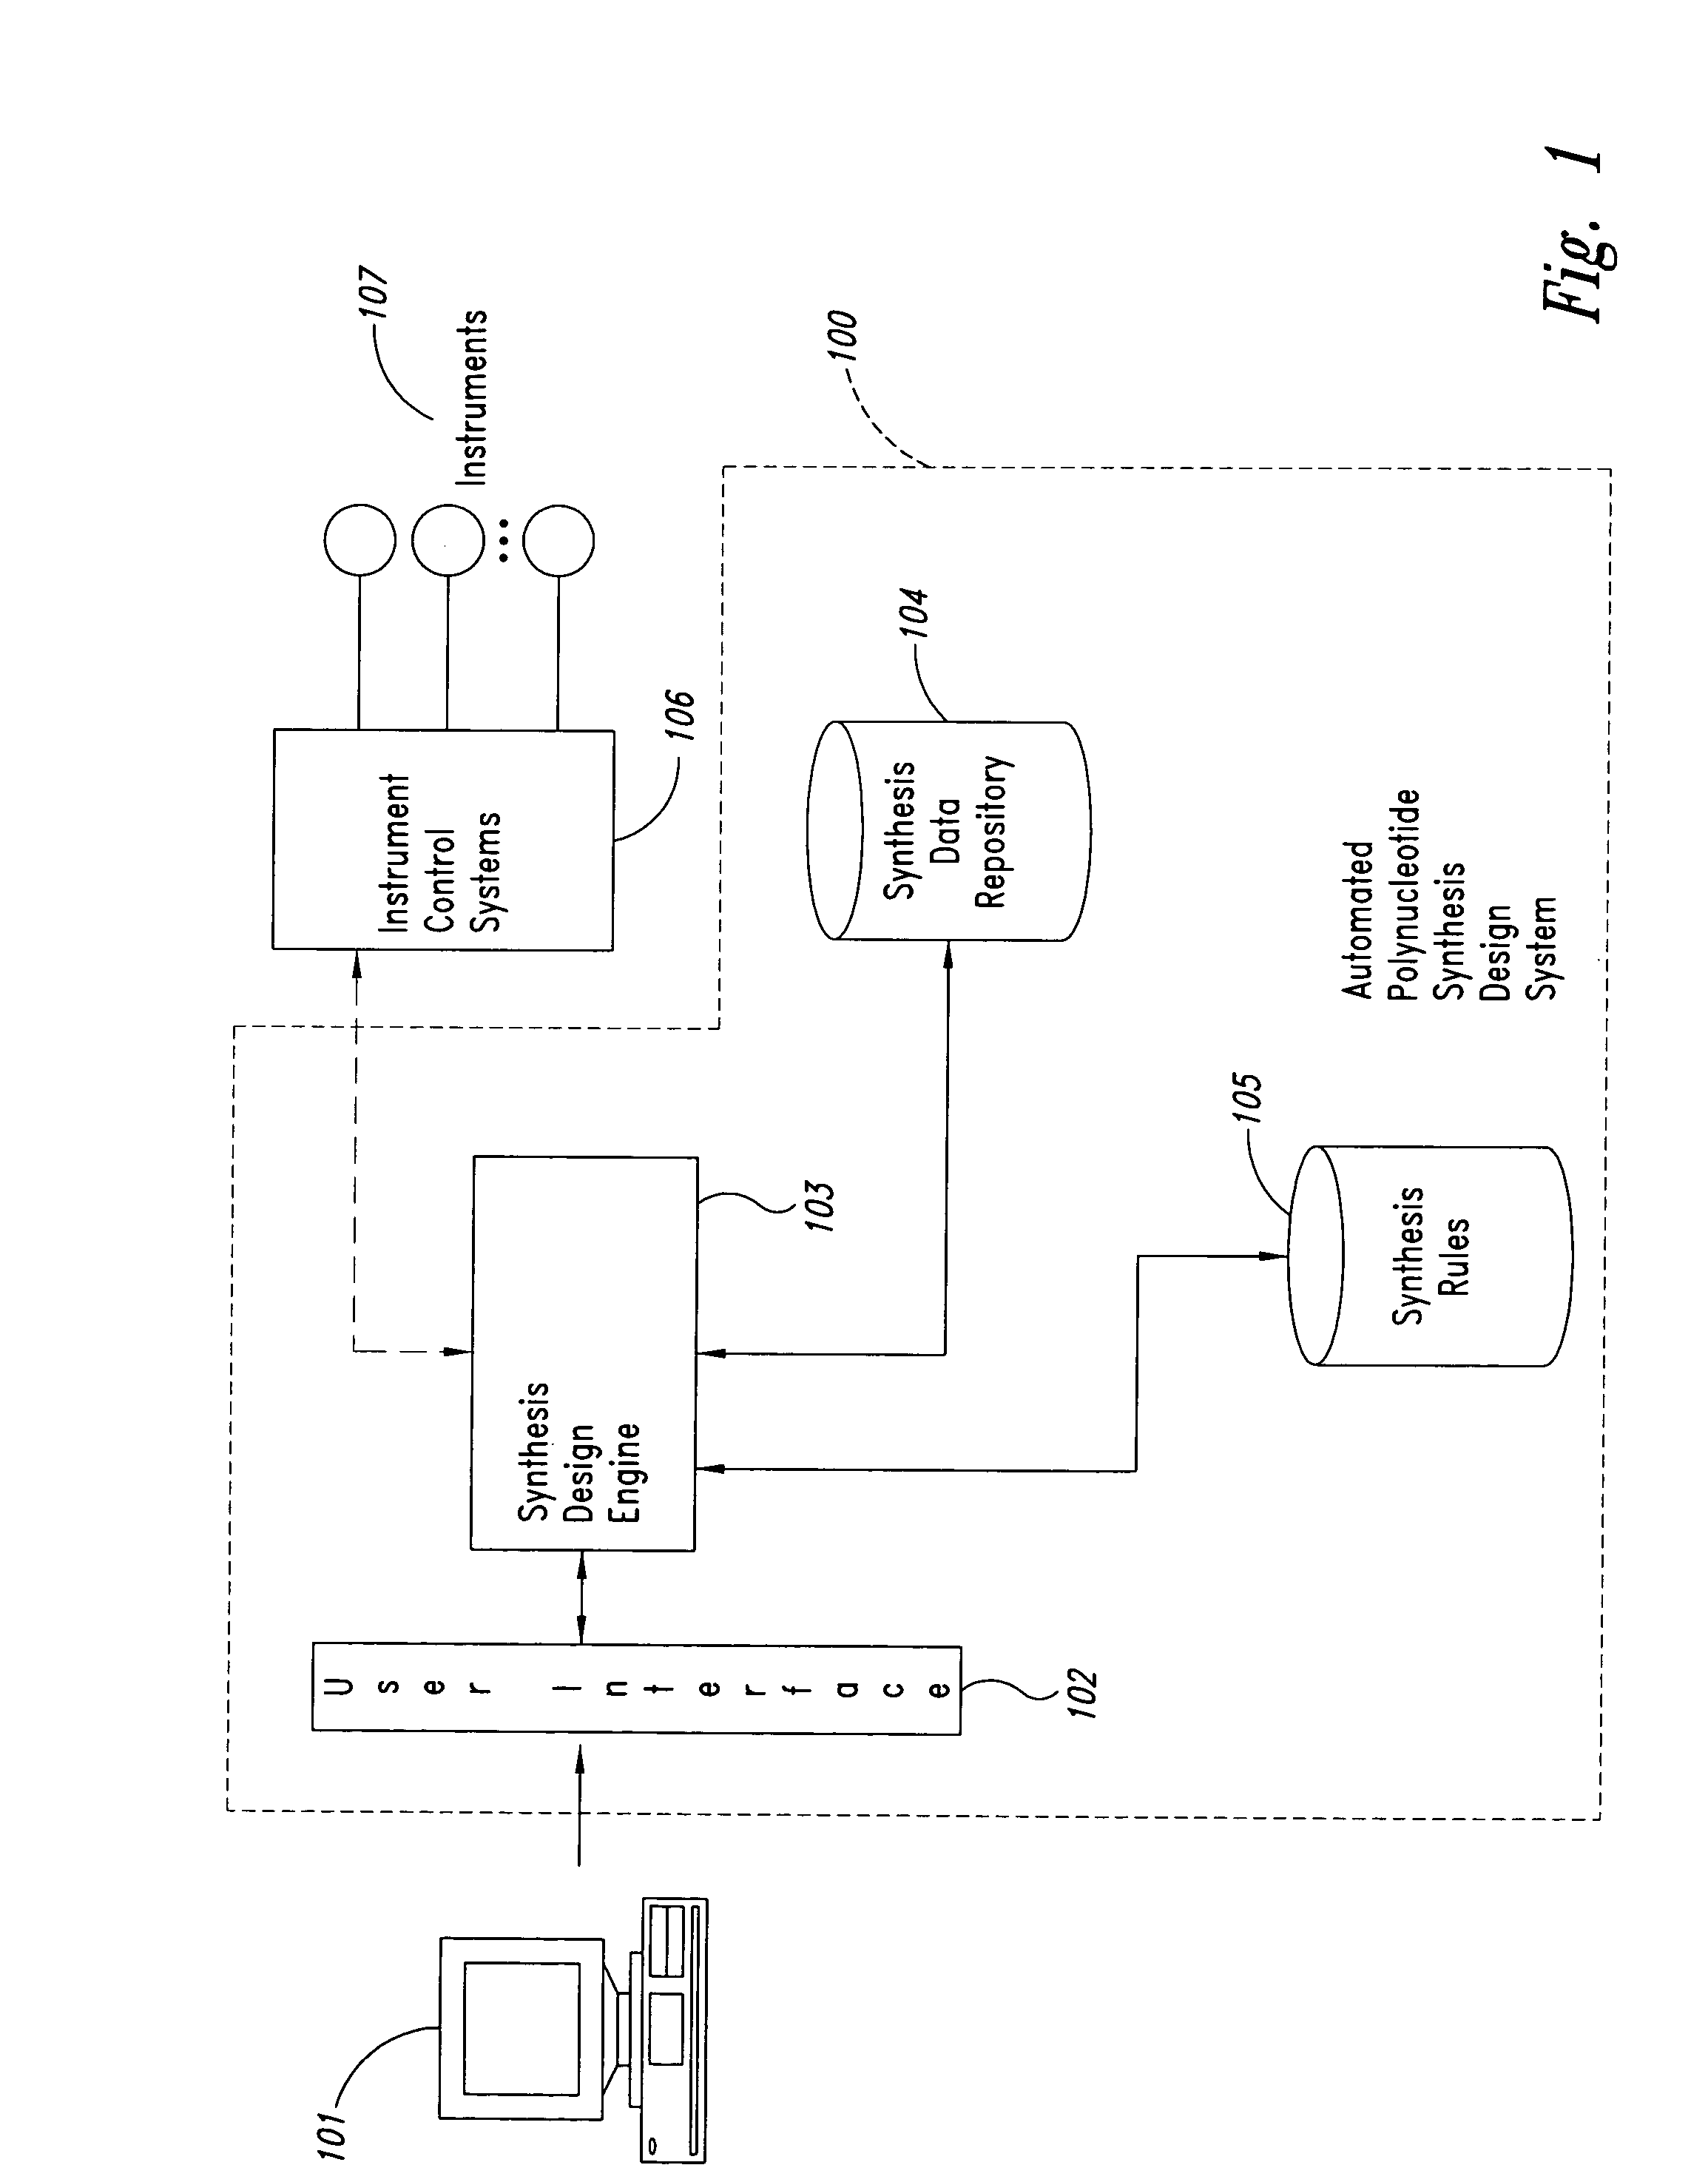 Method and system for polynucleotide synthesis